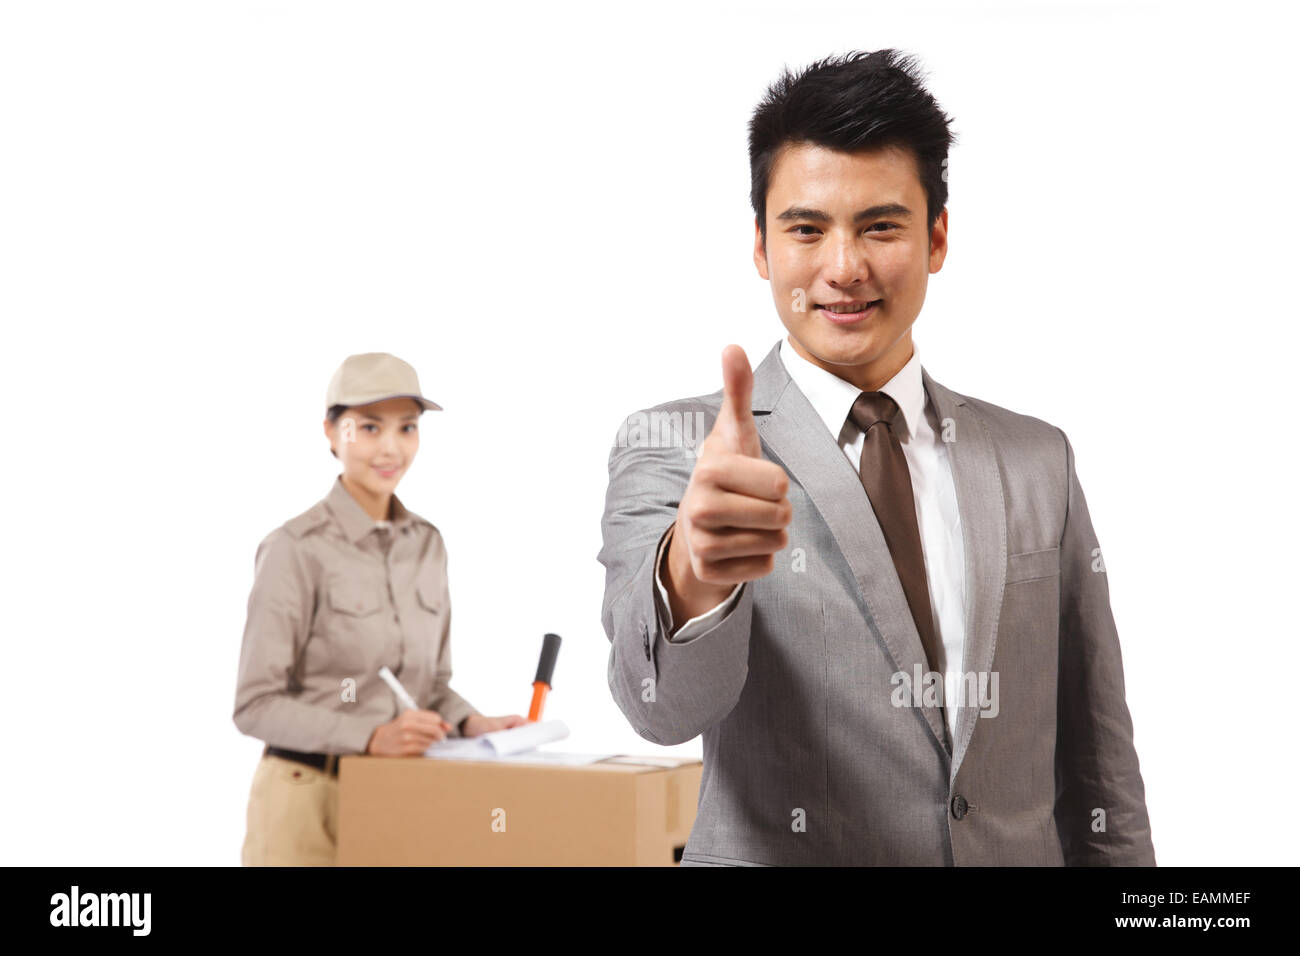 Youth logistics personnel and business man Stock Photo